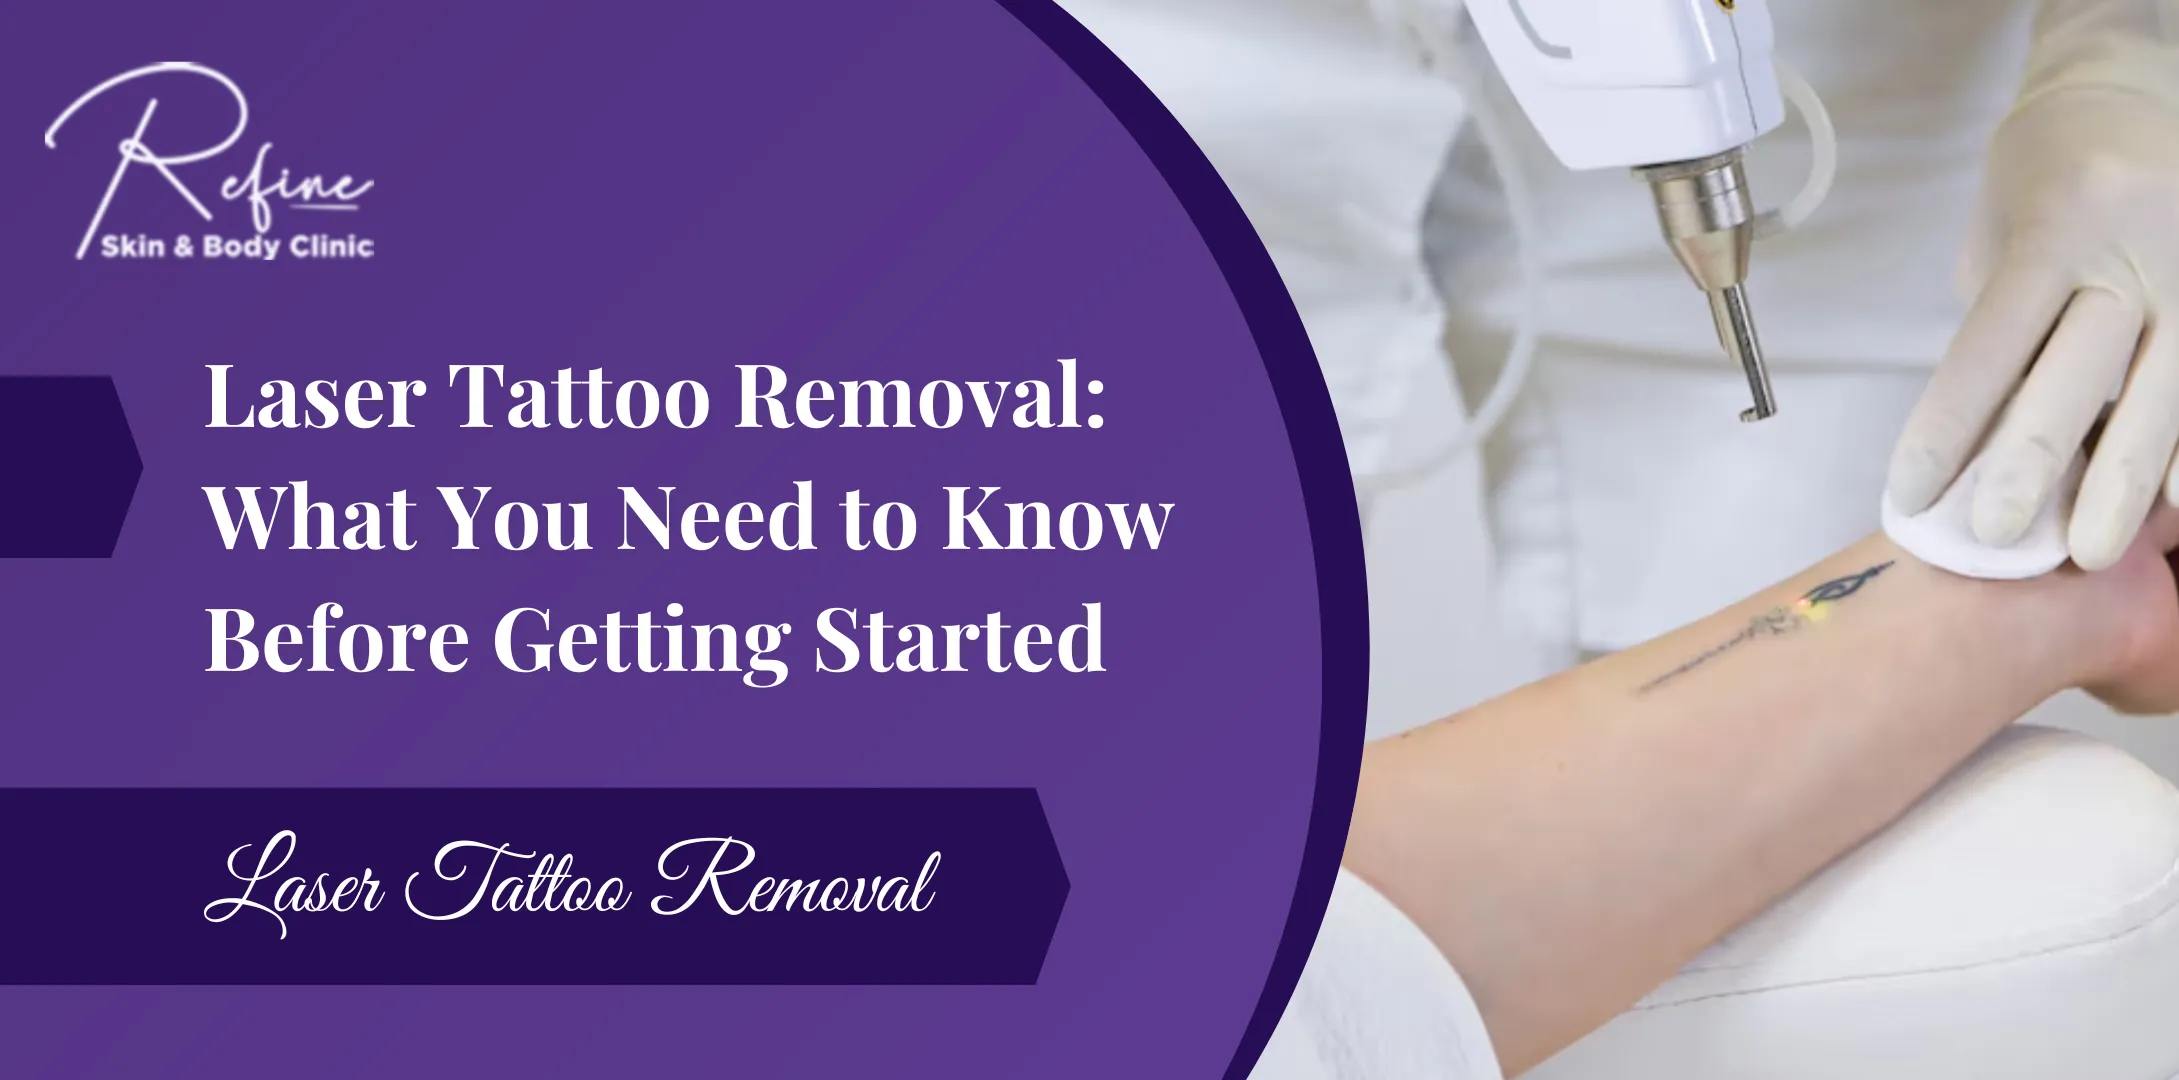 Laser Tattoo Removal: What You Need to Know Before Getting Started